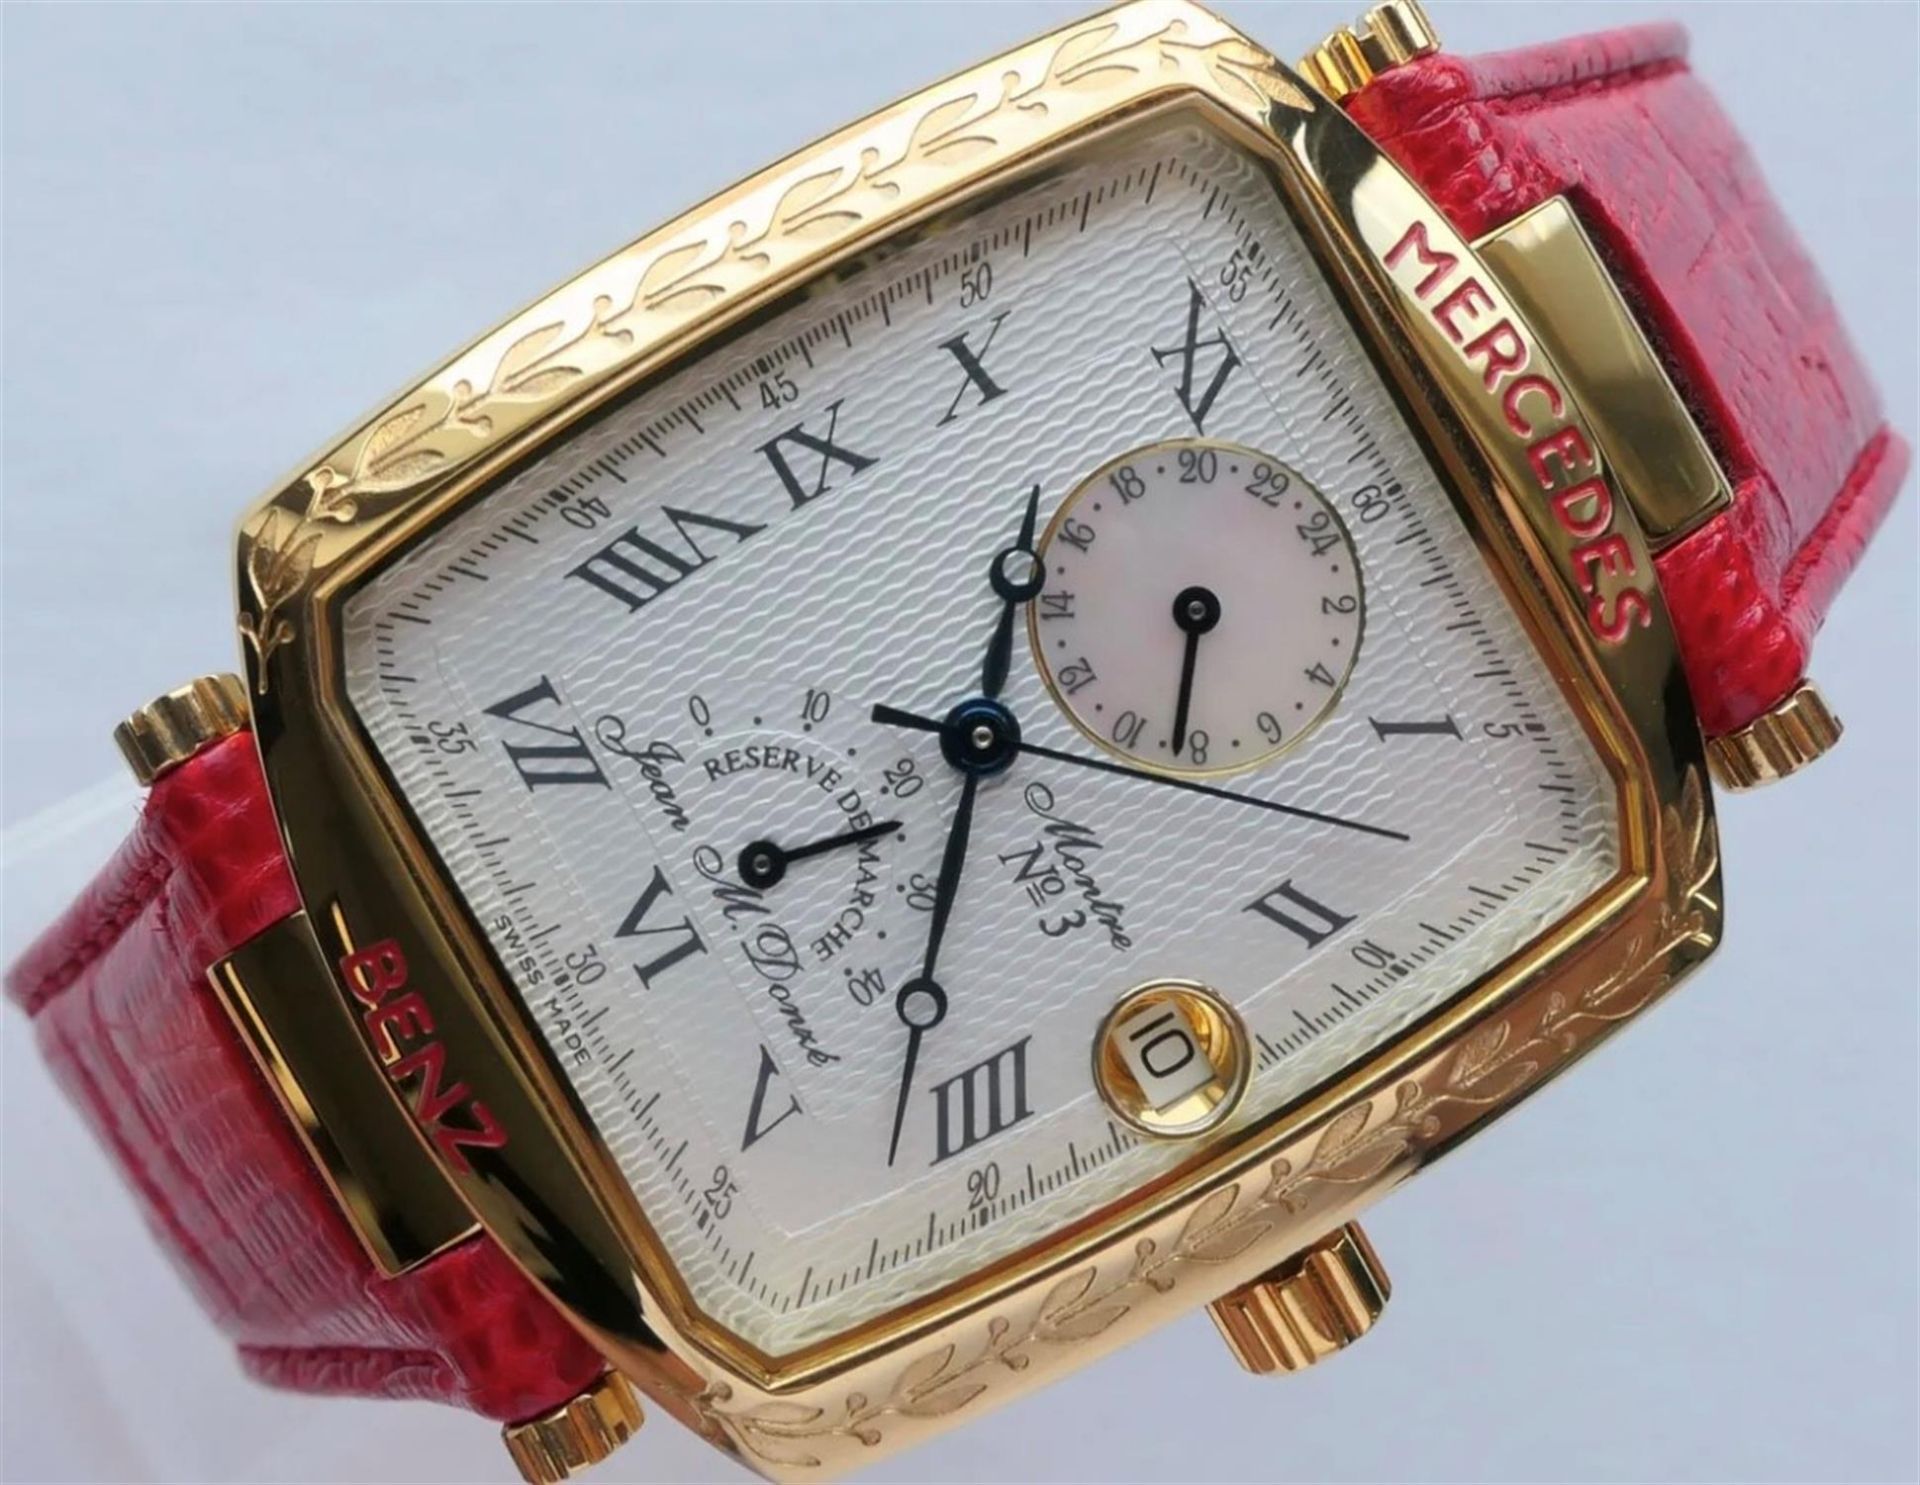 A 18ct Gold-Plated Mercedes-Benz Swiss-Made Automatic Wrist Watch - Image 3 of 10